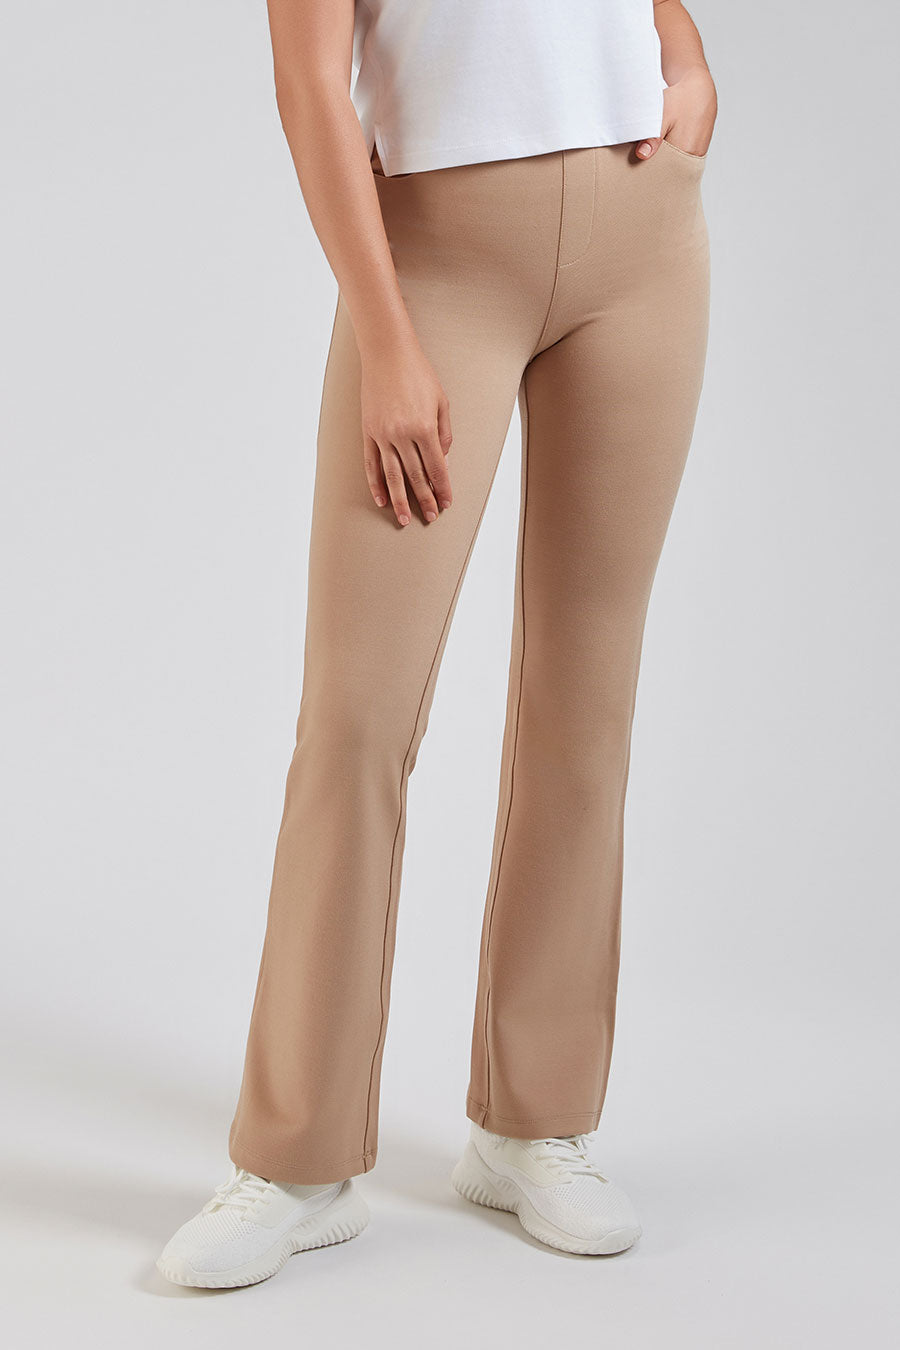 Buy VERO MODA Solid Slim Fit Polyester Women's Formal Wear Pant | Shoppers  Stop